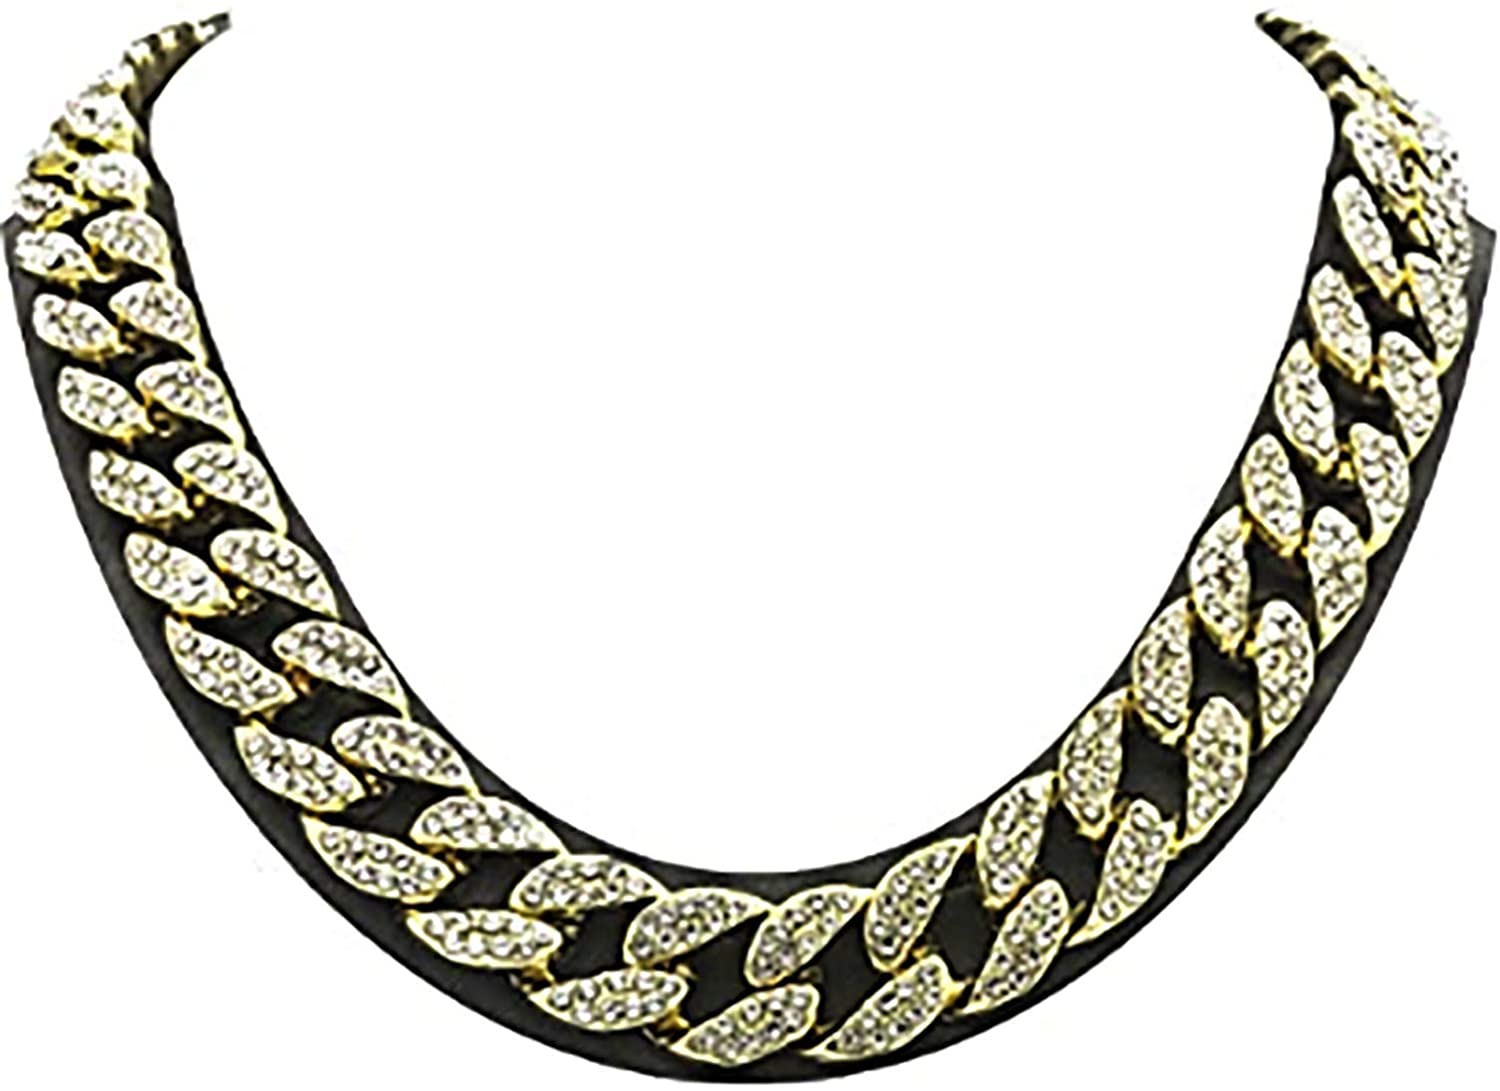 Wholesale Tai Jewelry - Buy Cheap in Bulk from China Suppliers with